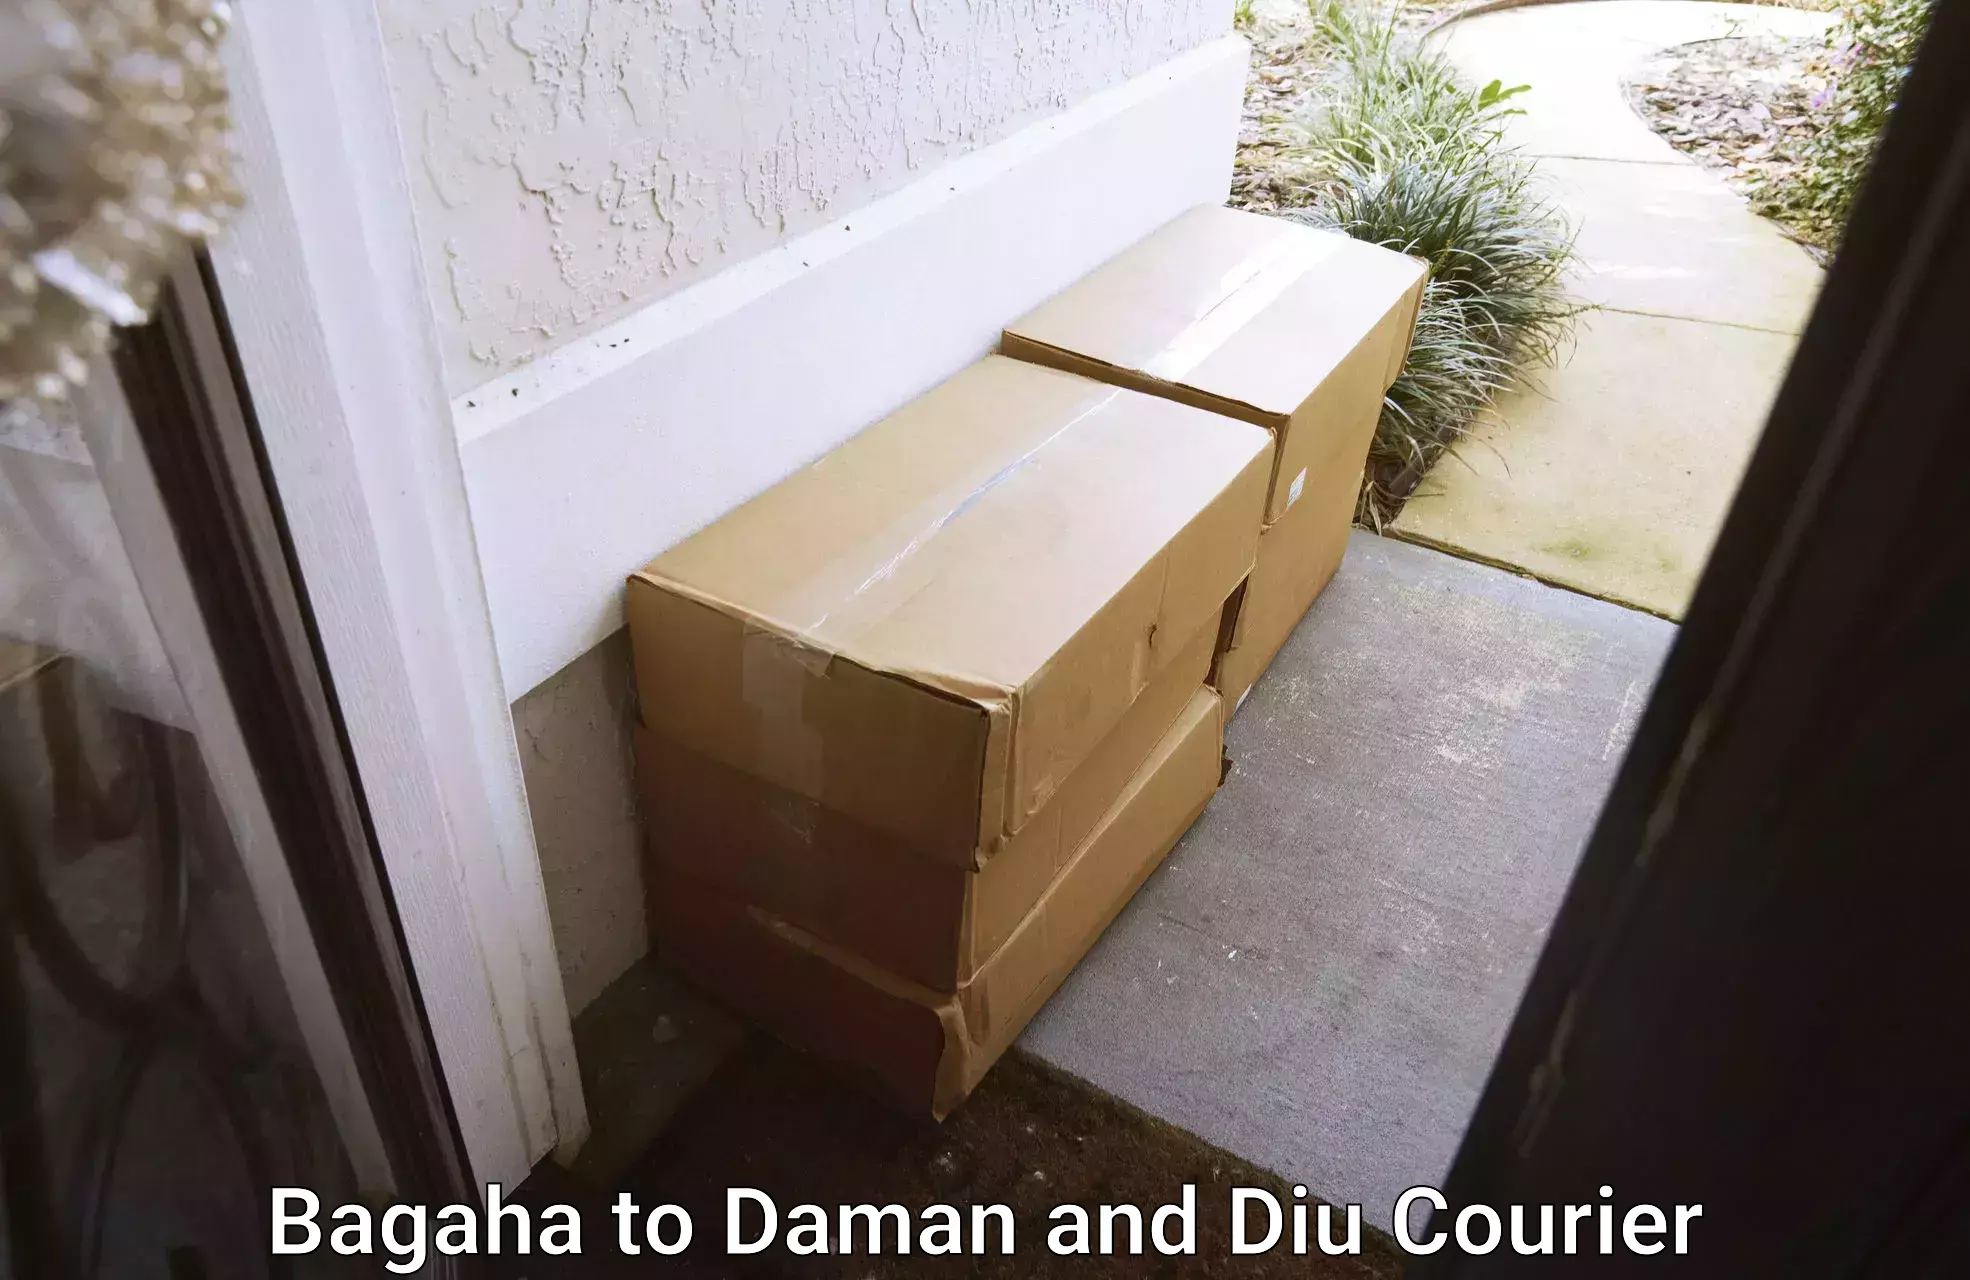 Full home relocation services Bagaha to Daman and Diu